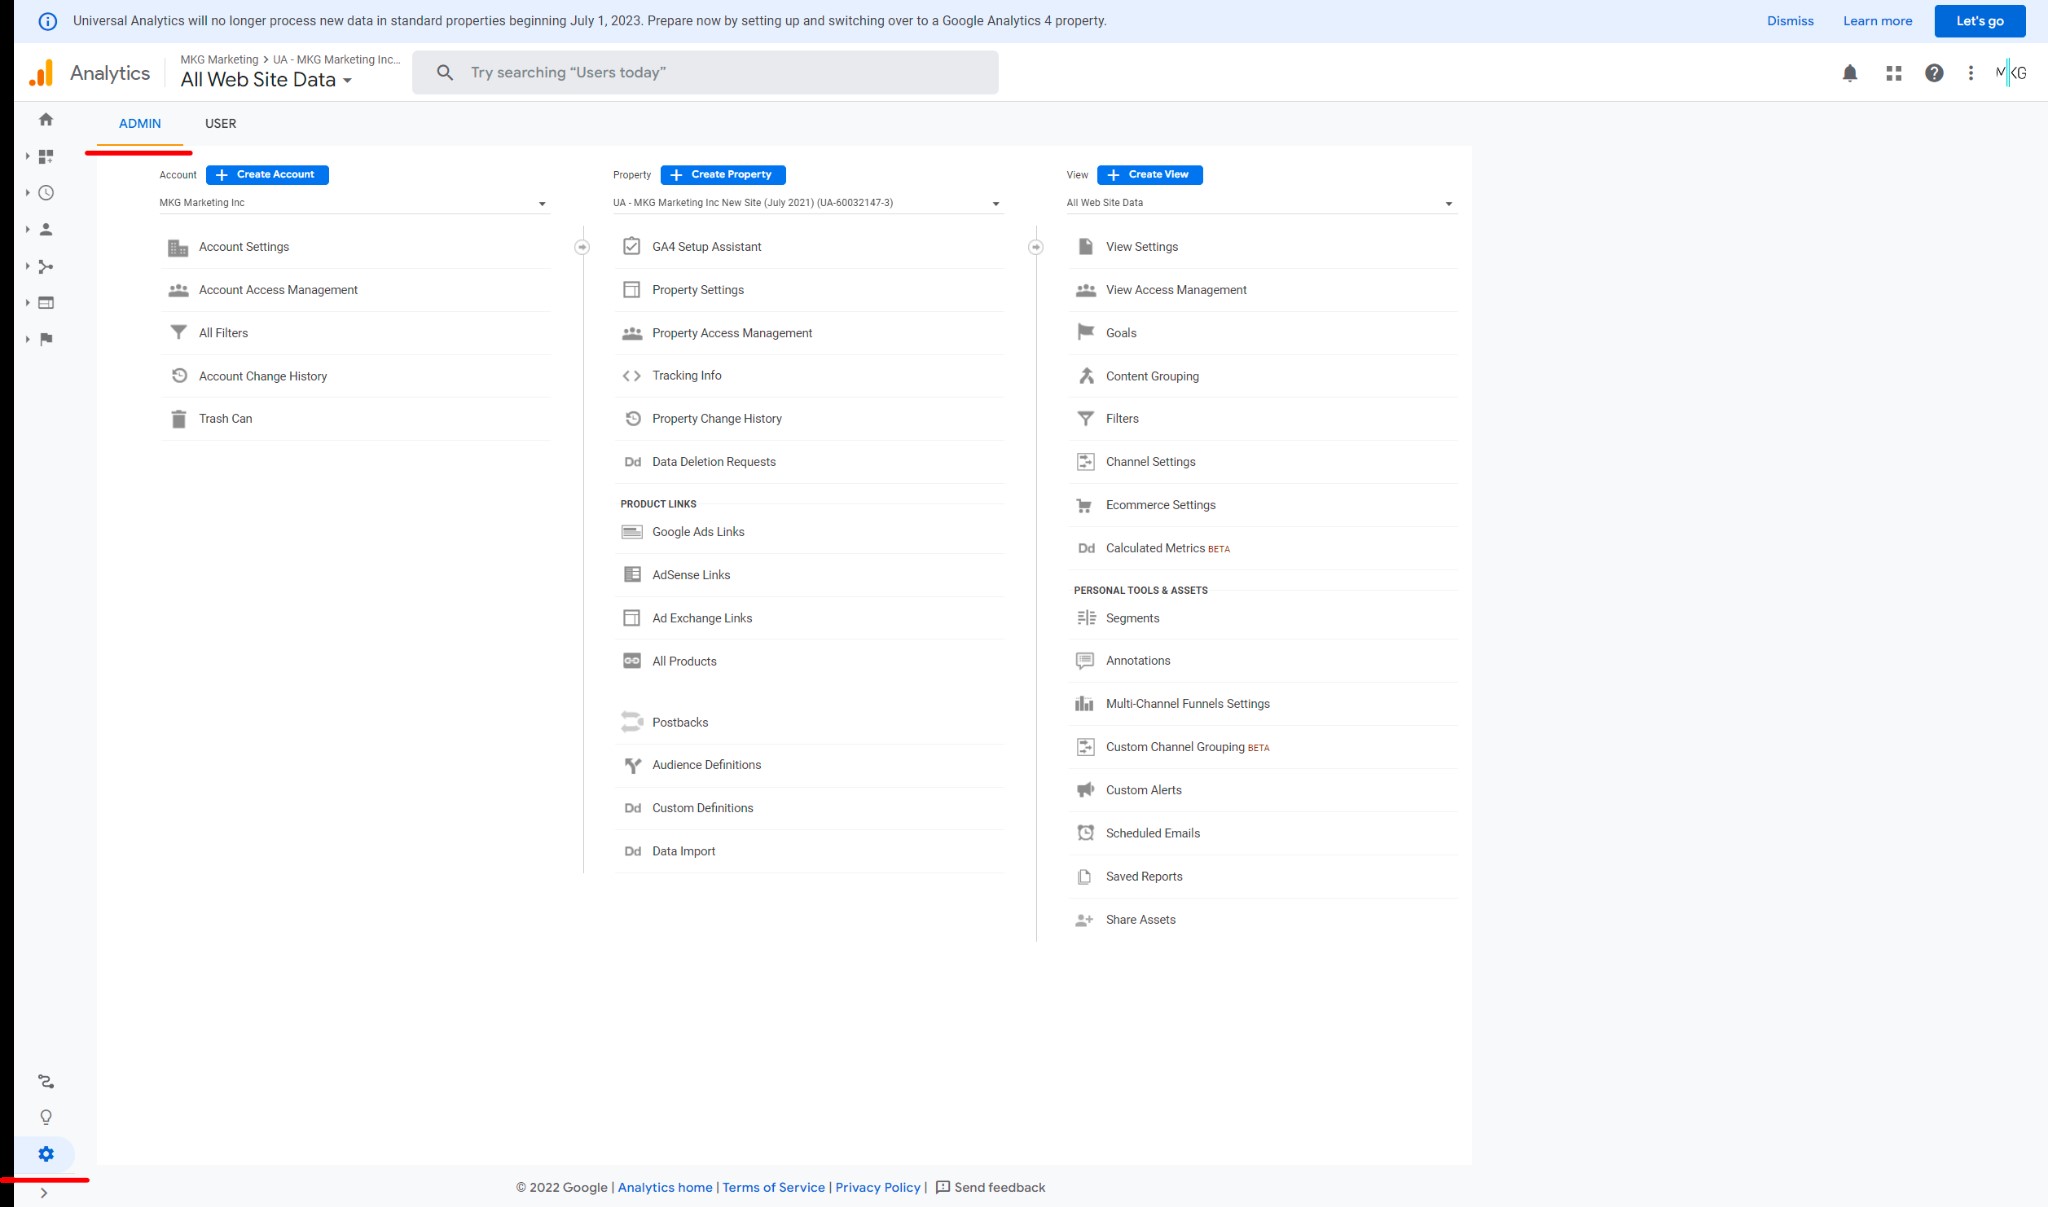 A screenshot of the Google Analytics configuration page